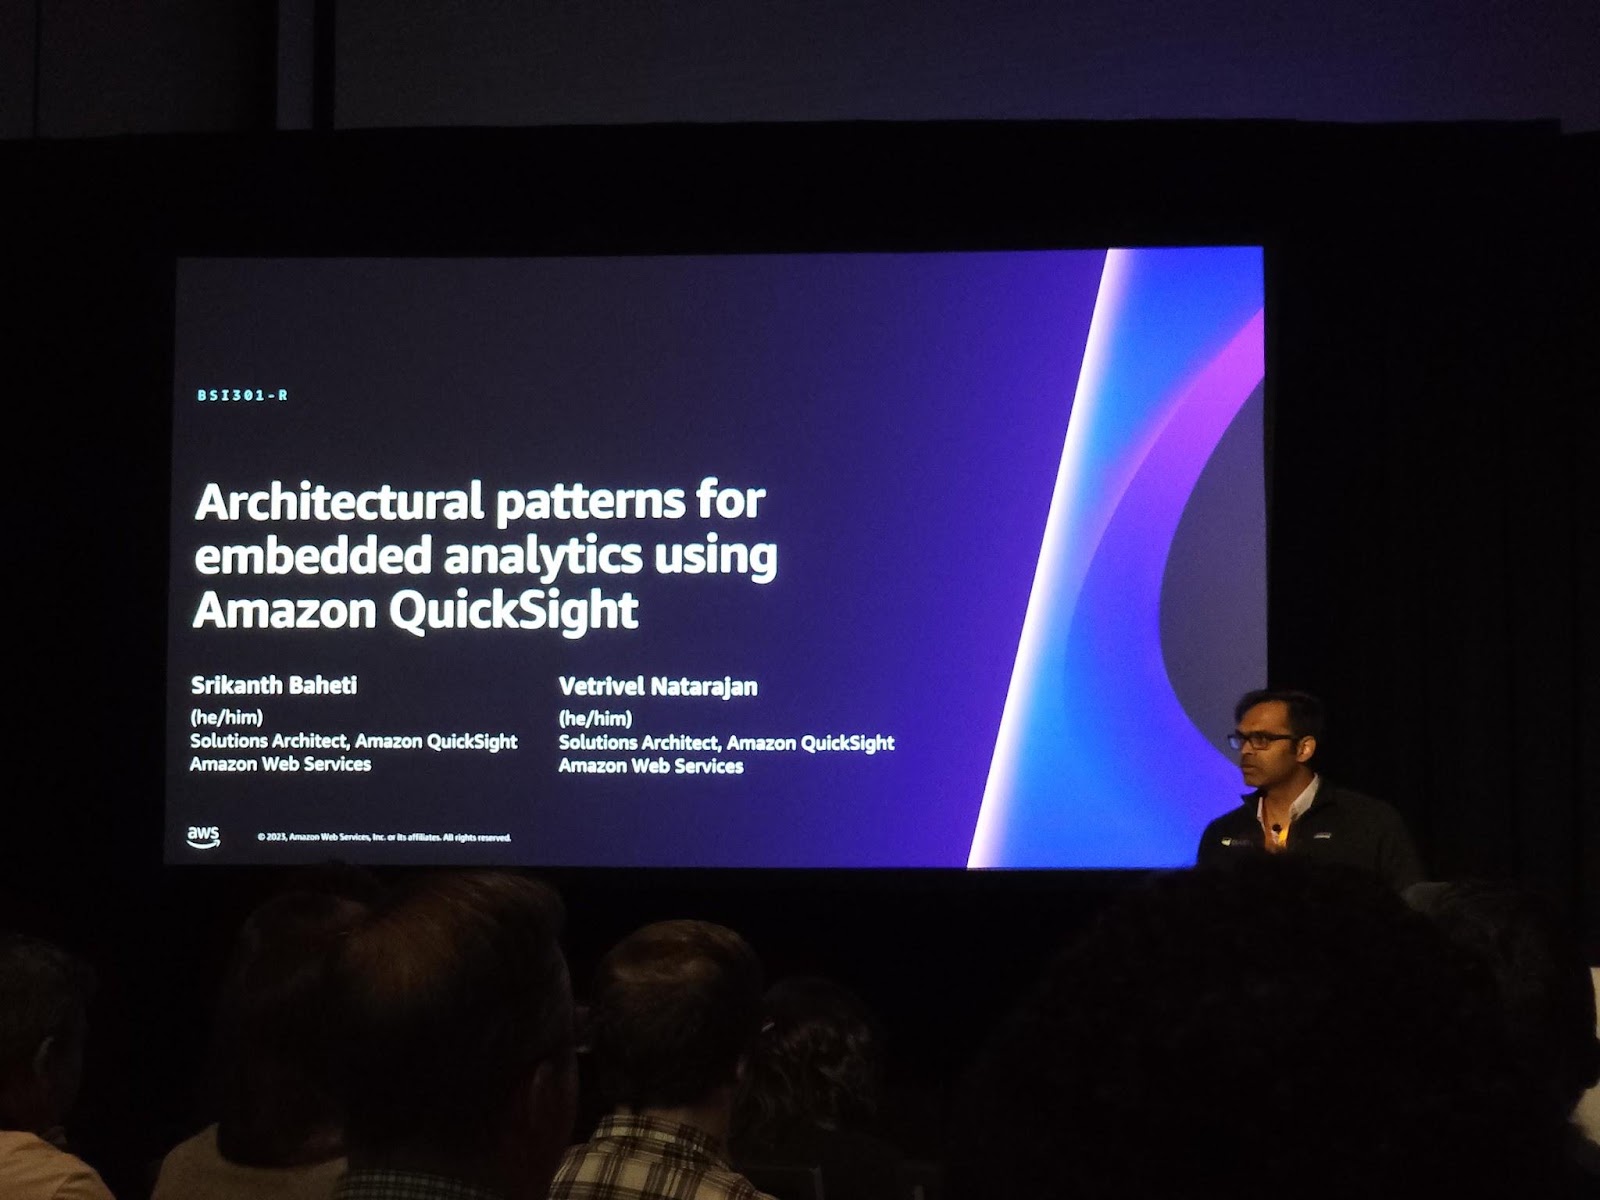 Architectural patterns for embedded analytics using Amazon QuickSight